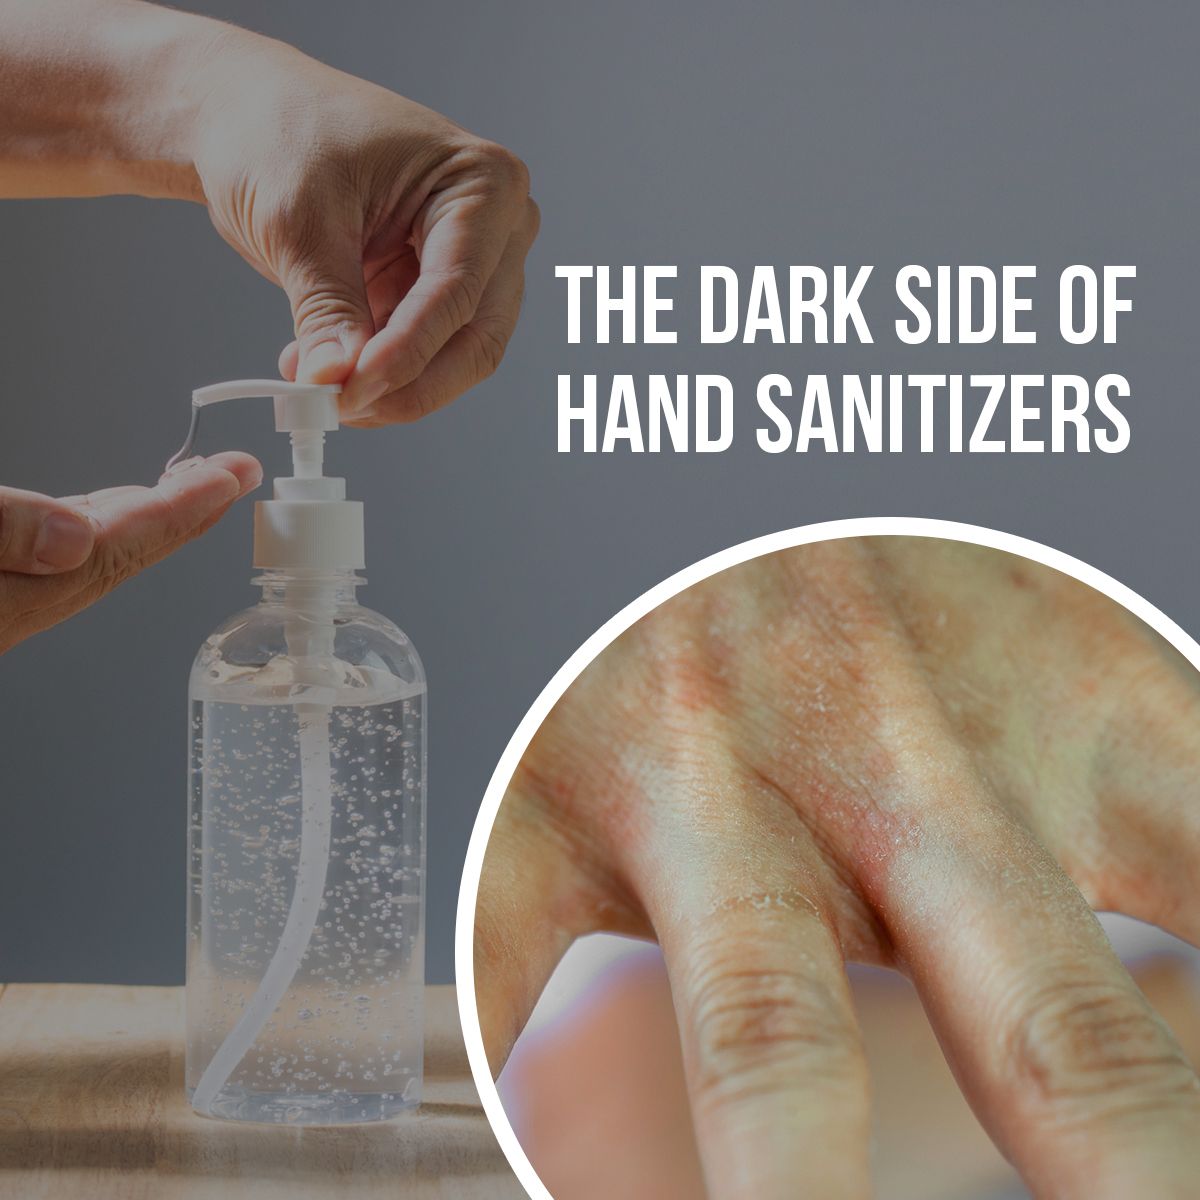 The Dark Side of Hand Sanitizers